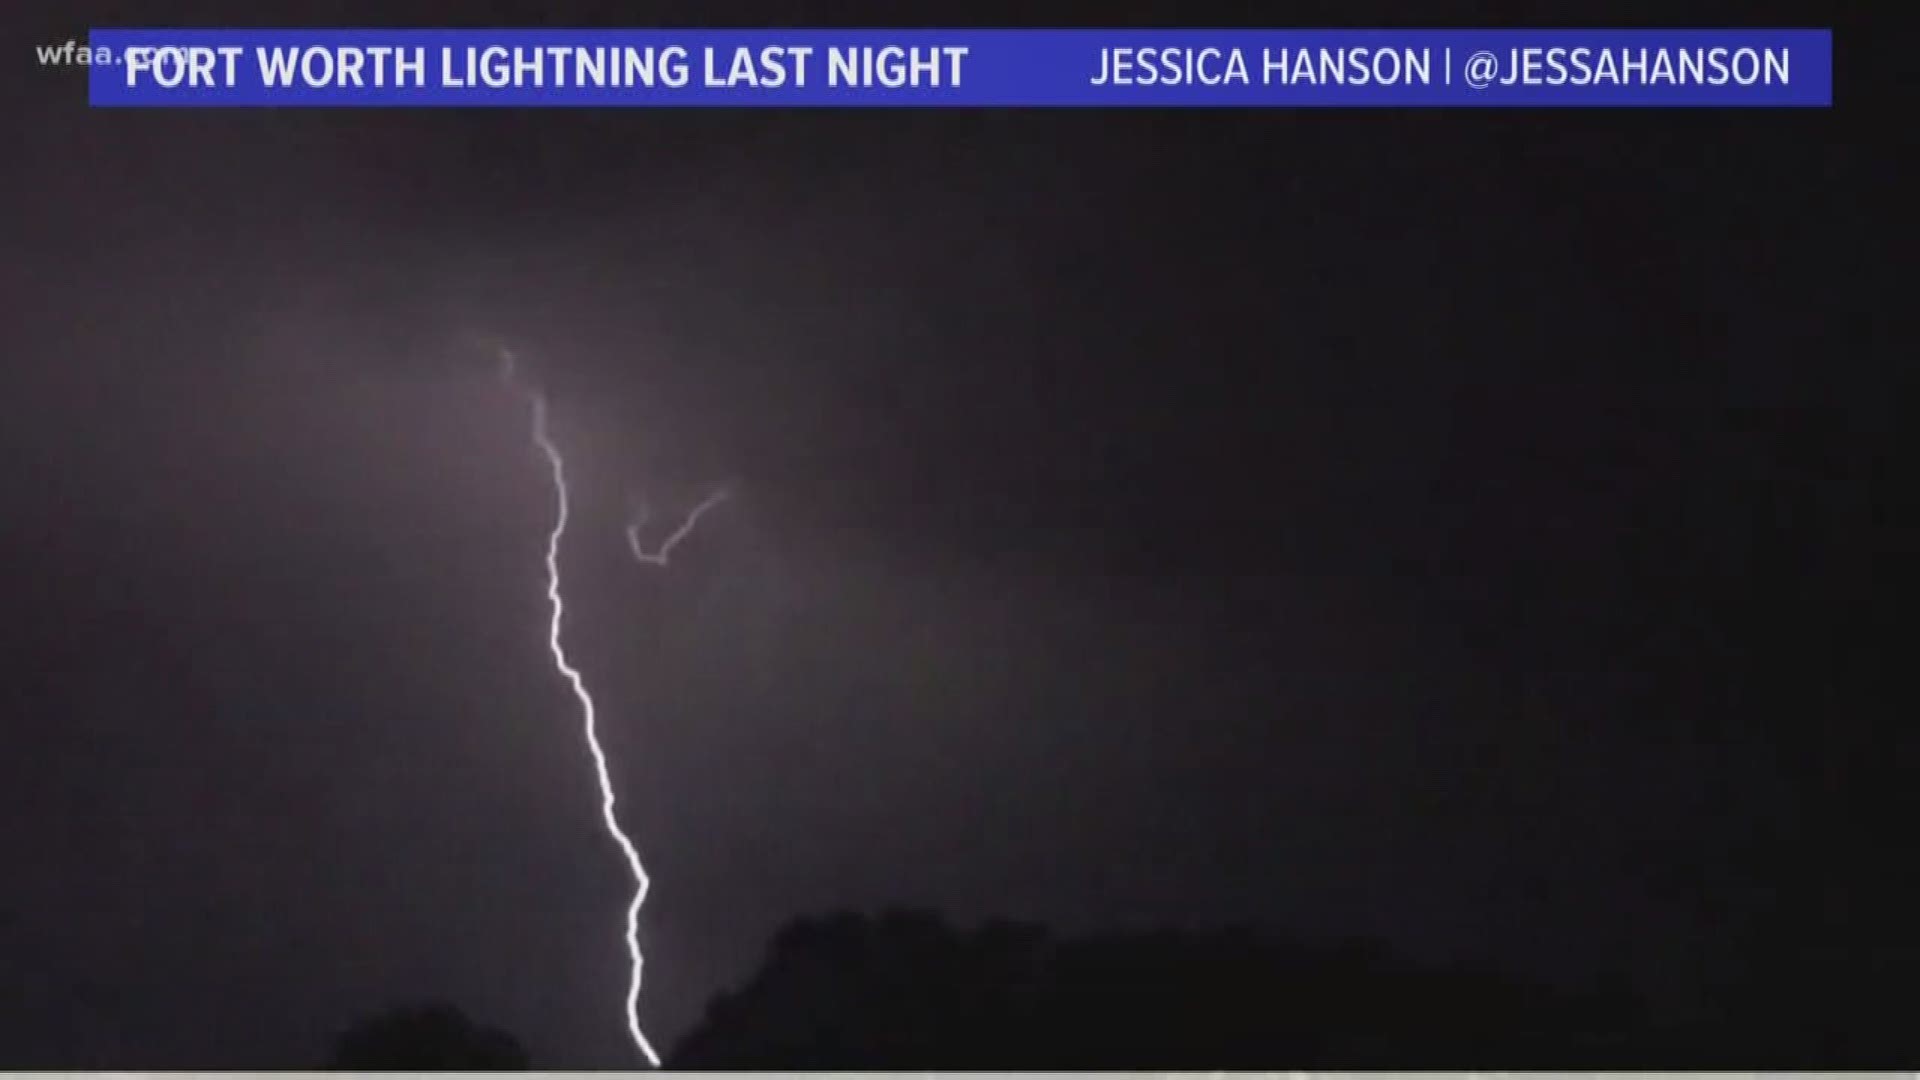 You saw a lot of lightning last night. Here's why.